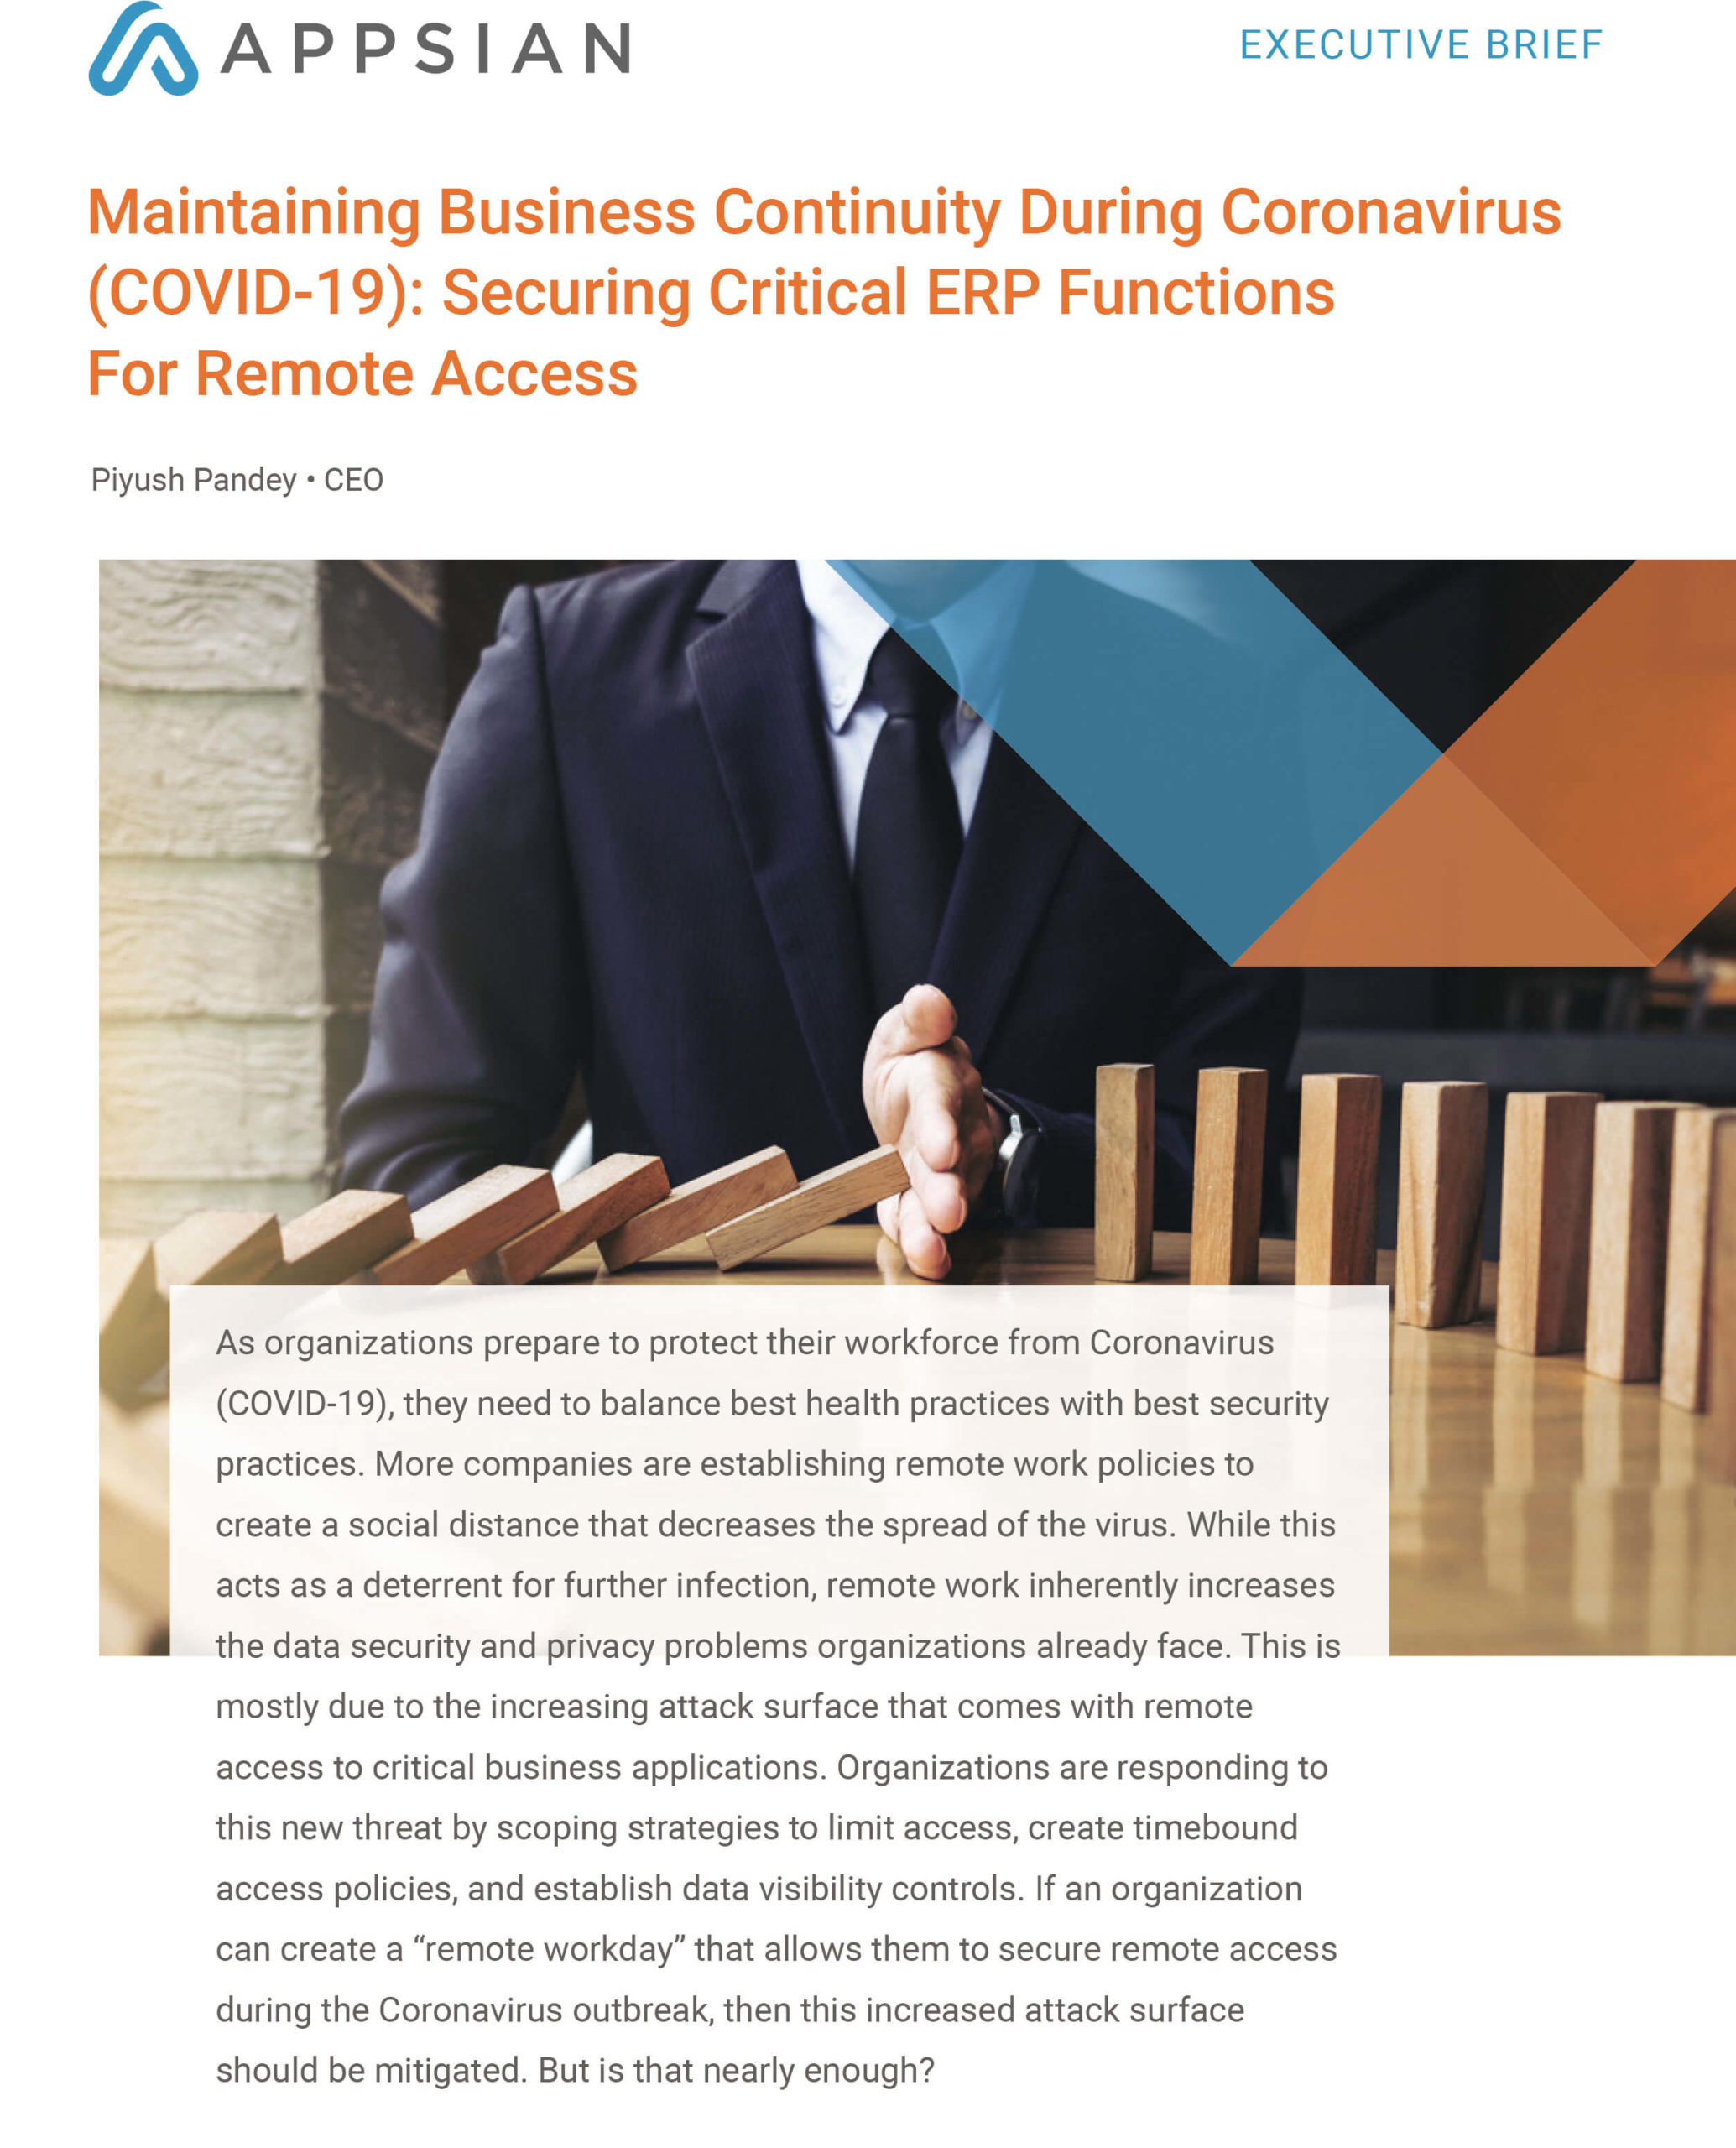 Maintaining Business Continuity During Coronavirus (COVID-19): Securing Critical ERP Functions For Remote Access